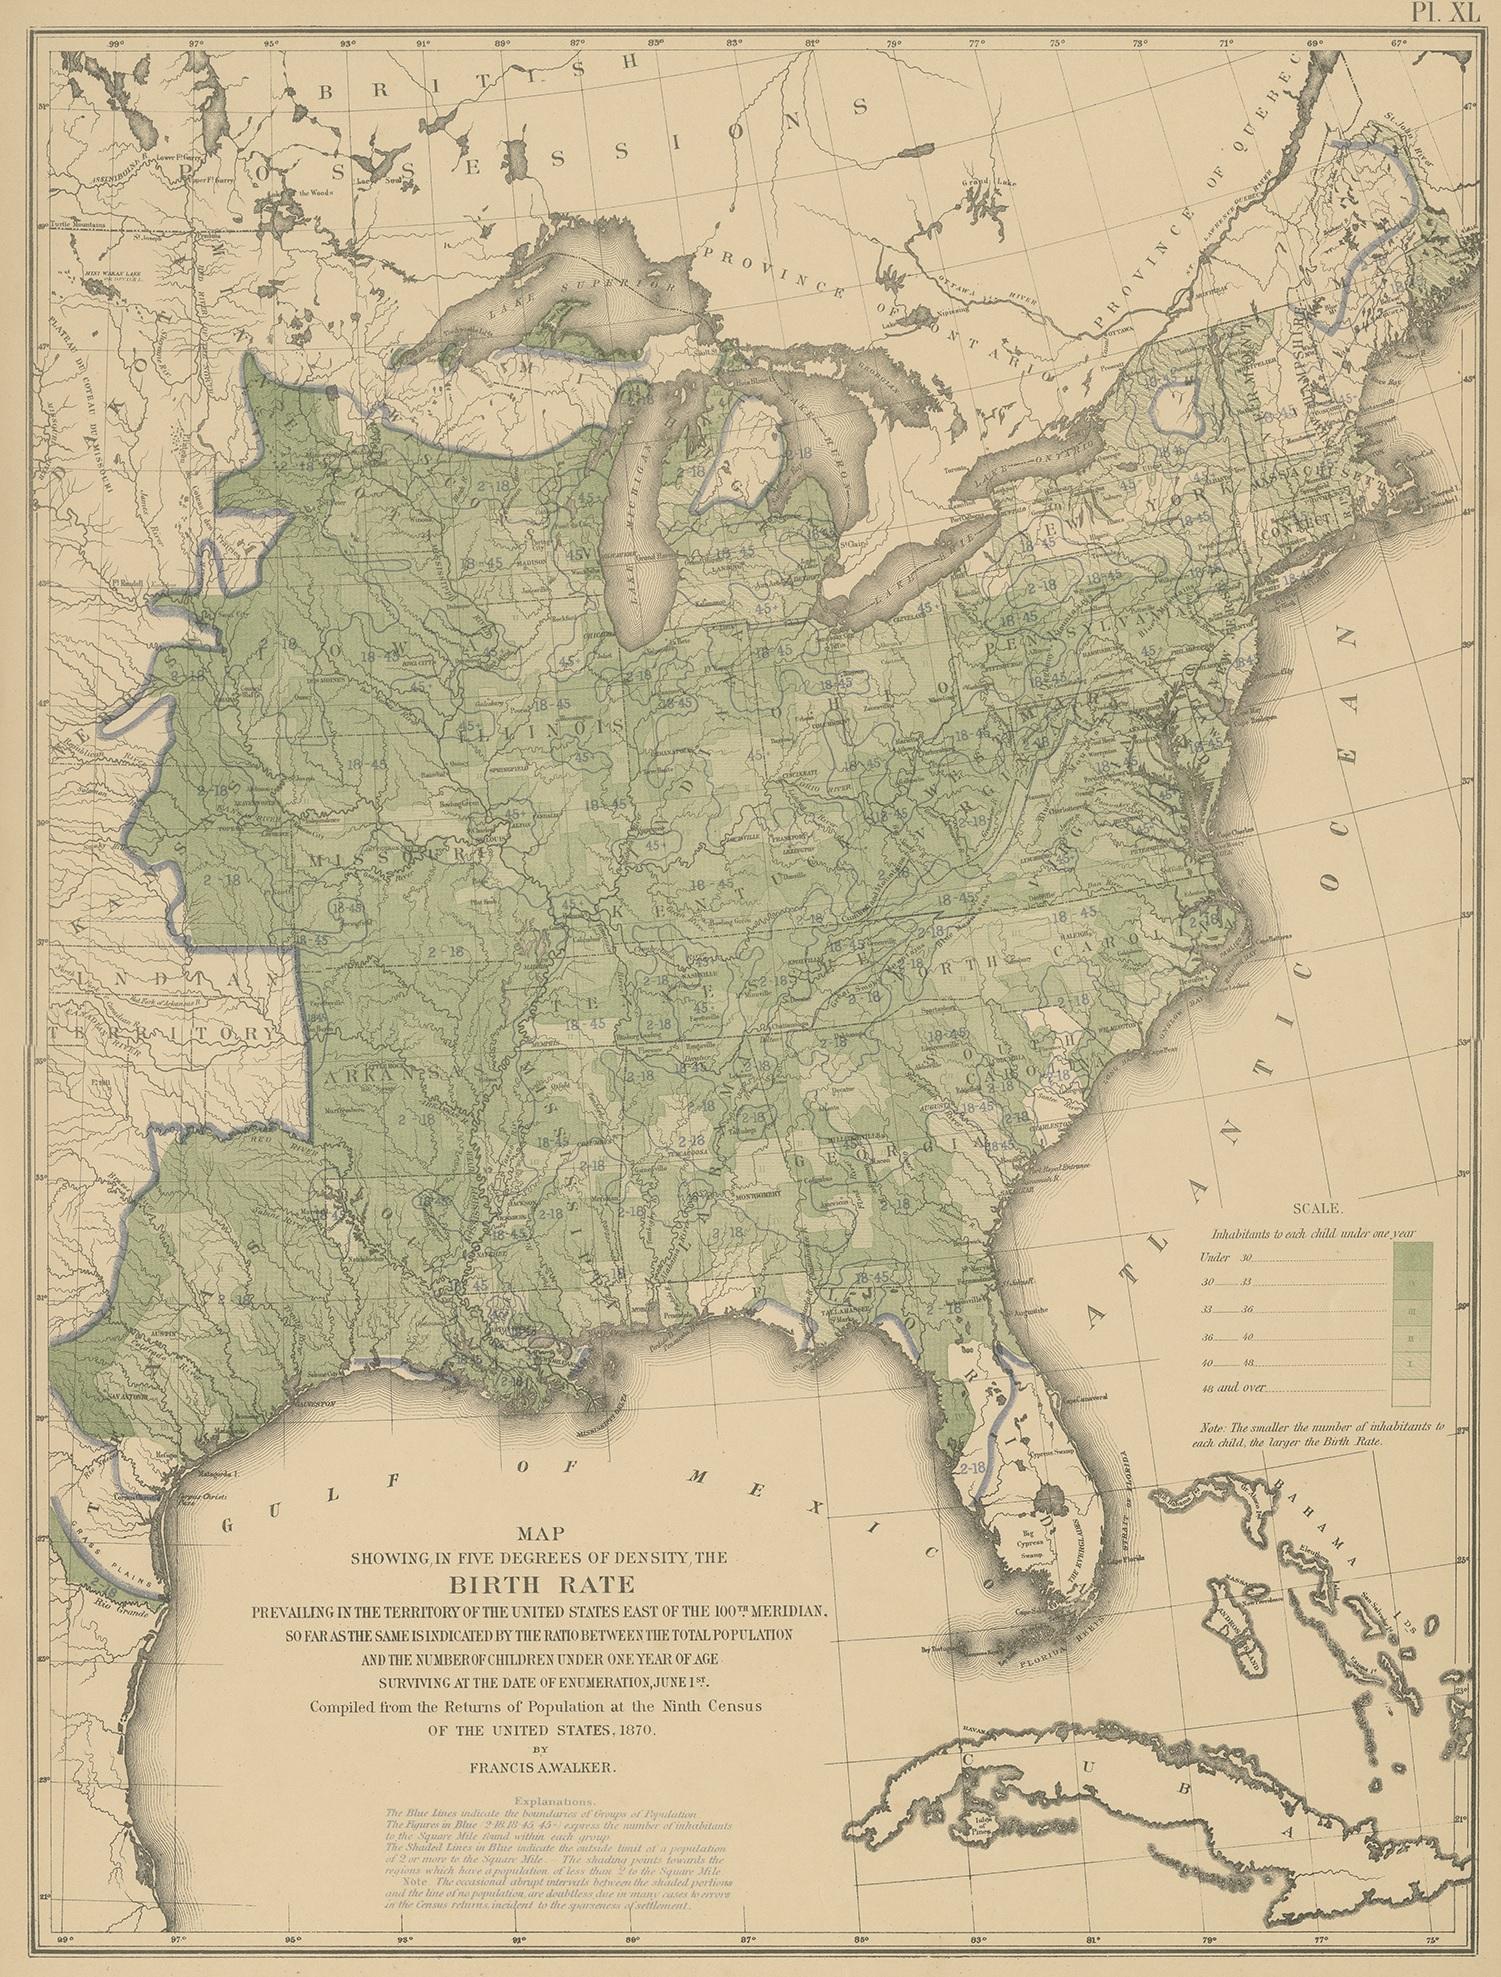 Antique chart titled 'Map showing, in five degrees of density, the birth rate prevailing in the territory of the United States east of the 100th Meridian, so far as the same is indicated by the ratio between the total population and the number of